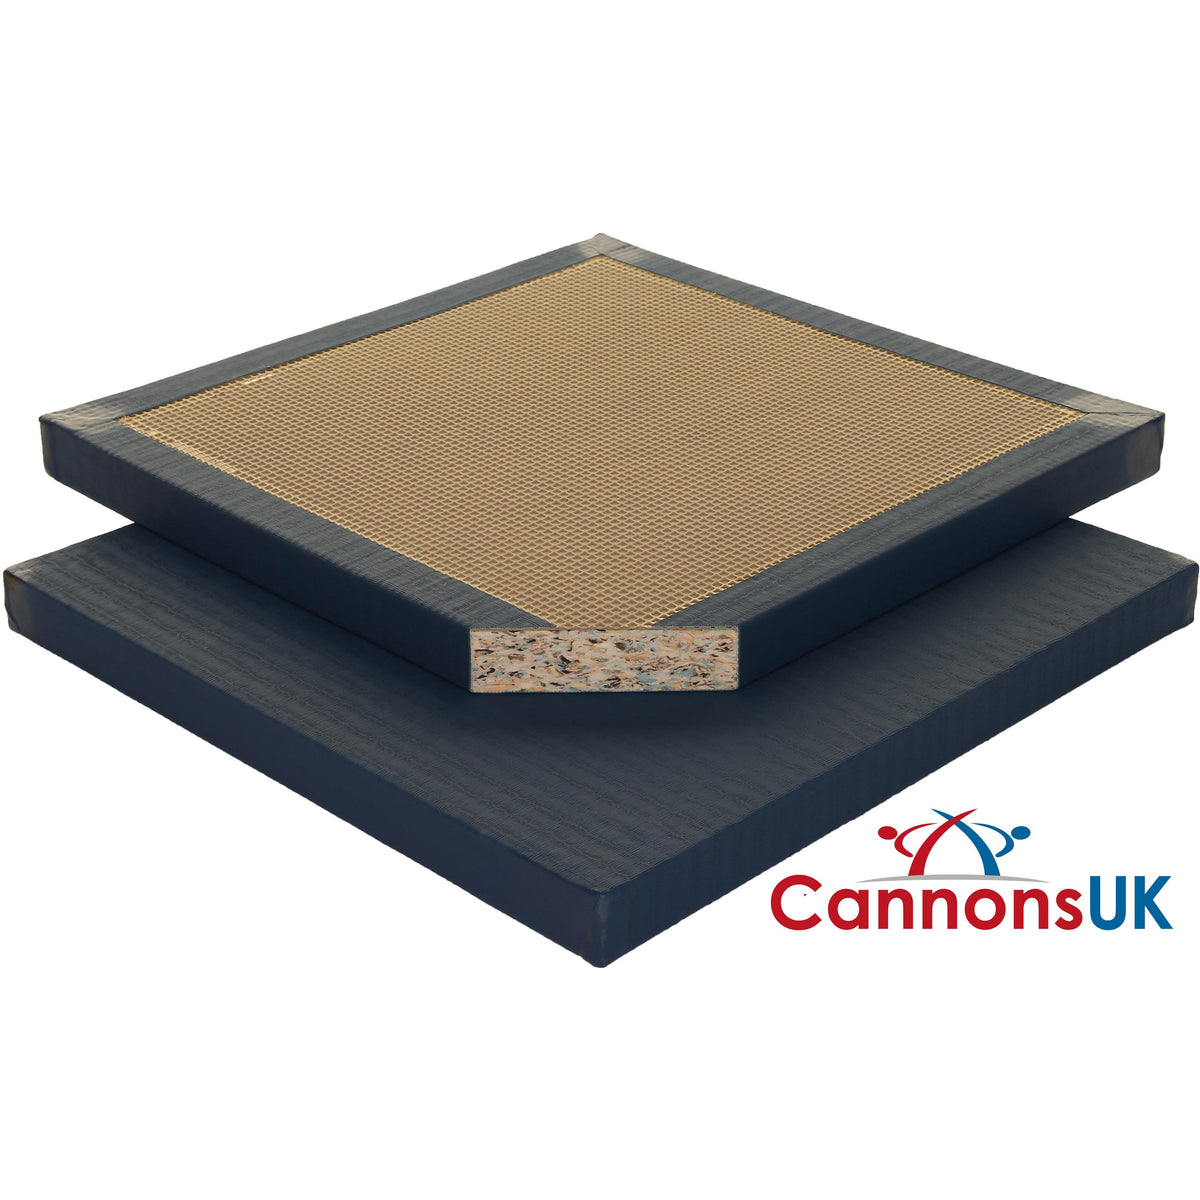 Cannons UK Contest Judo Mats 1m x 2m x 40mm - Cannons UK